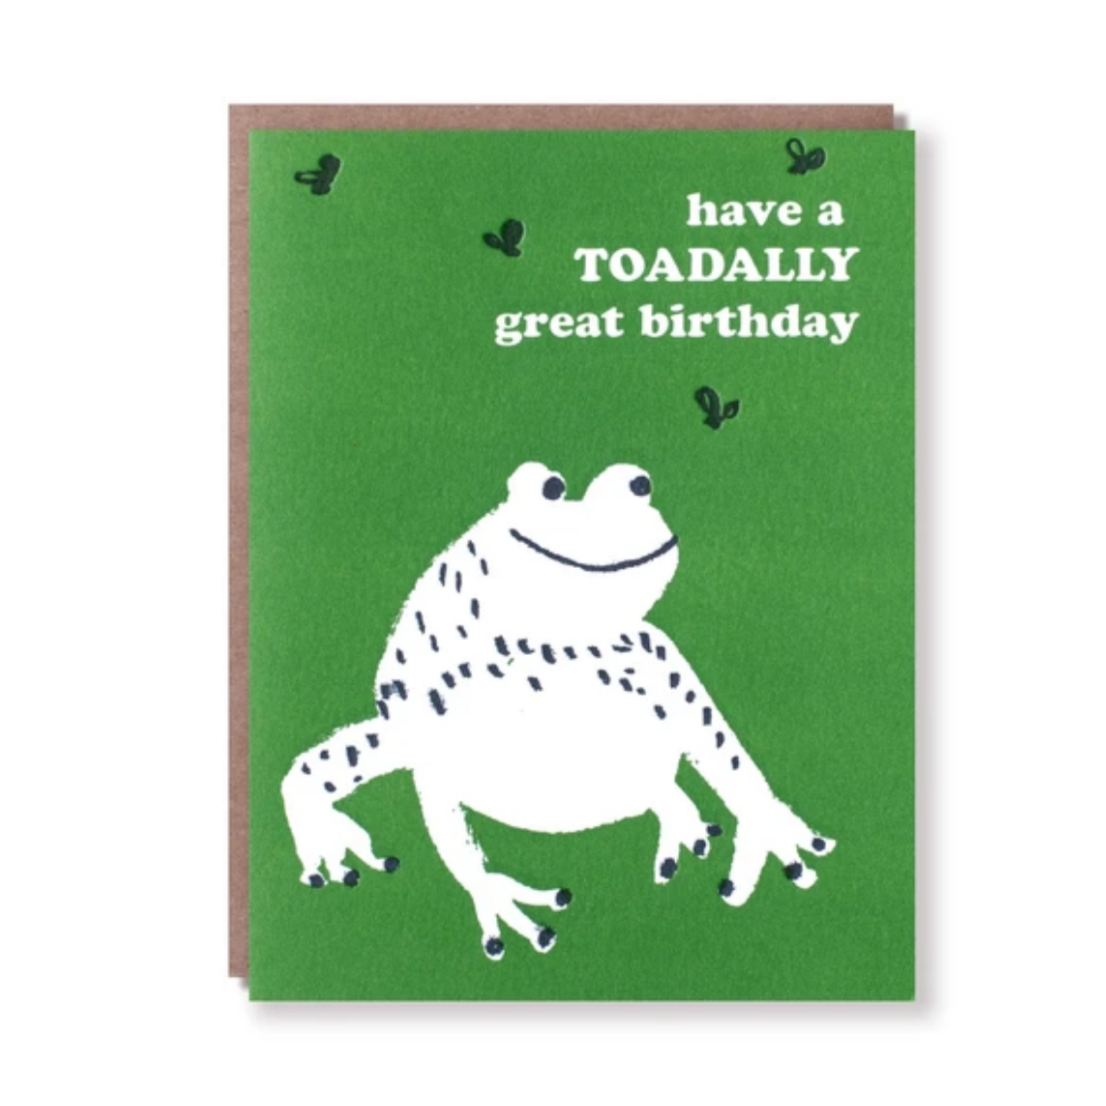 green card with white toad and white text